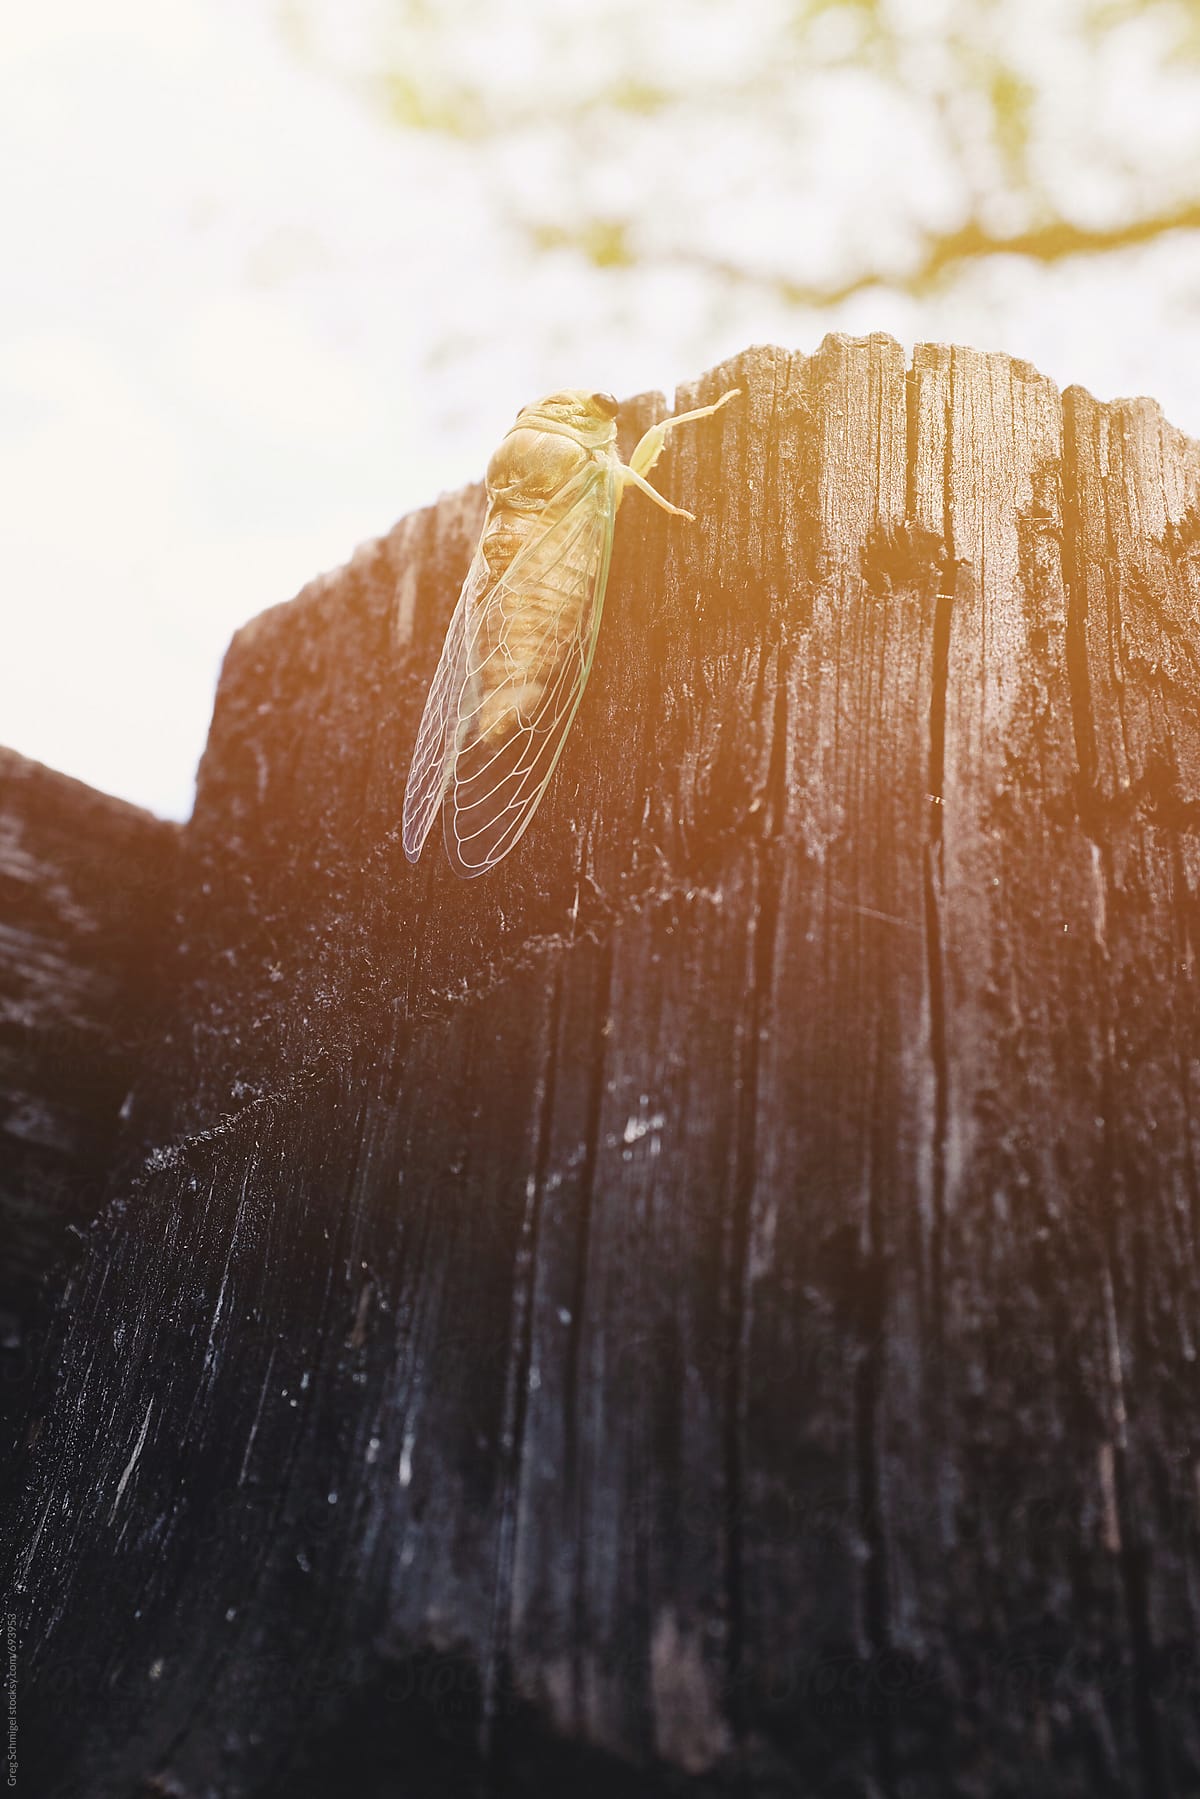 A live cicada locust insect resting on a wooden fence in the afternoon sunlight